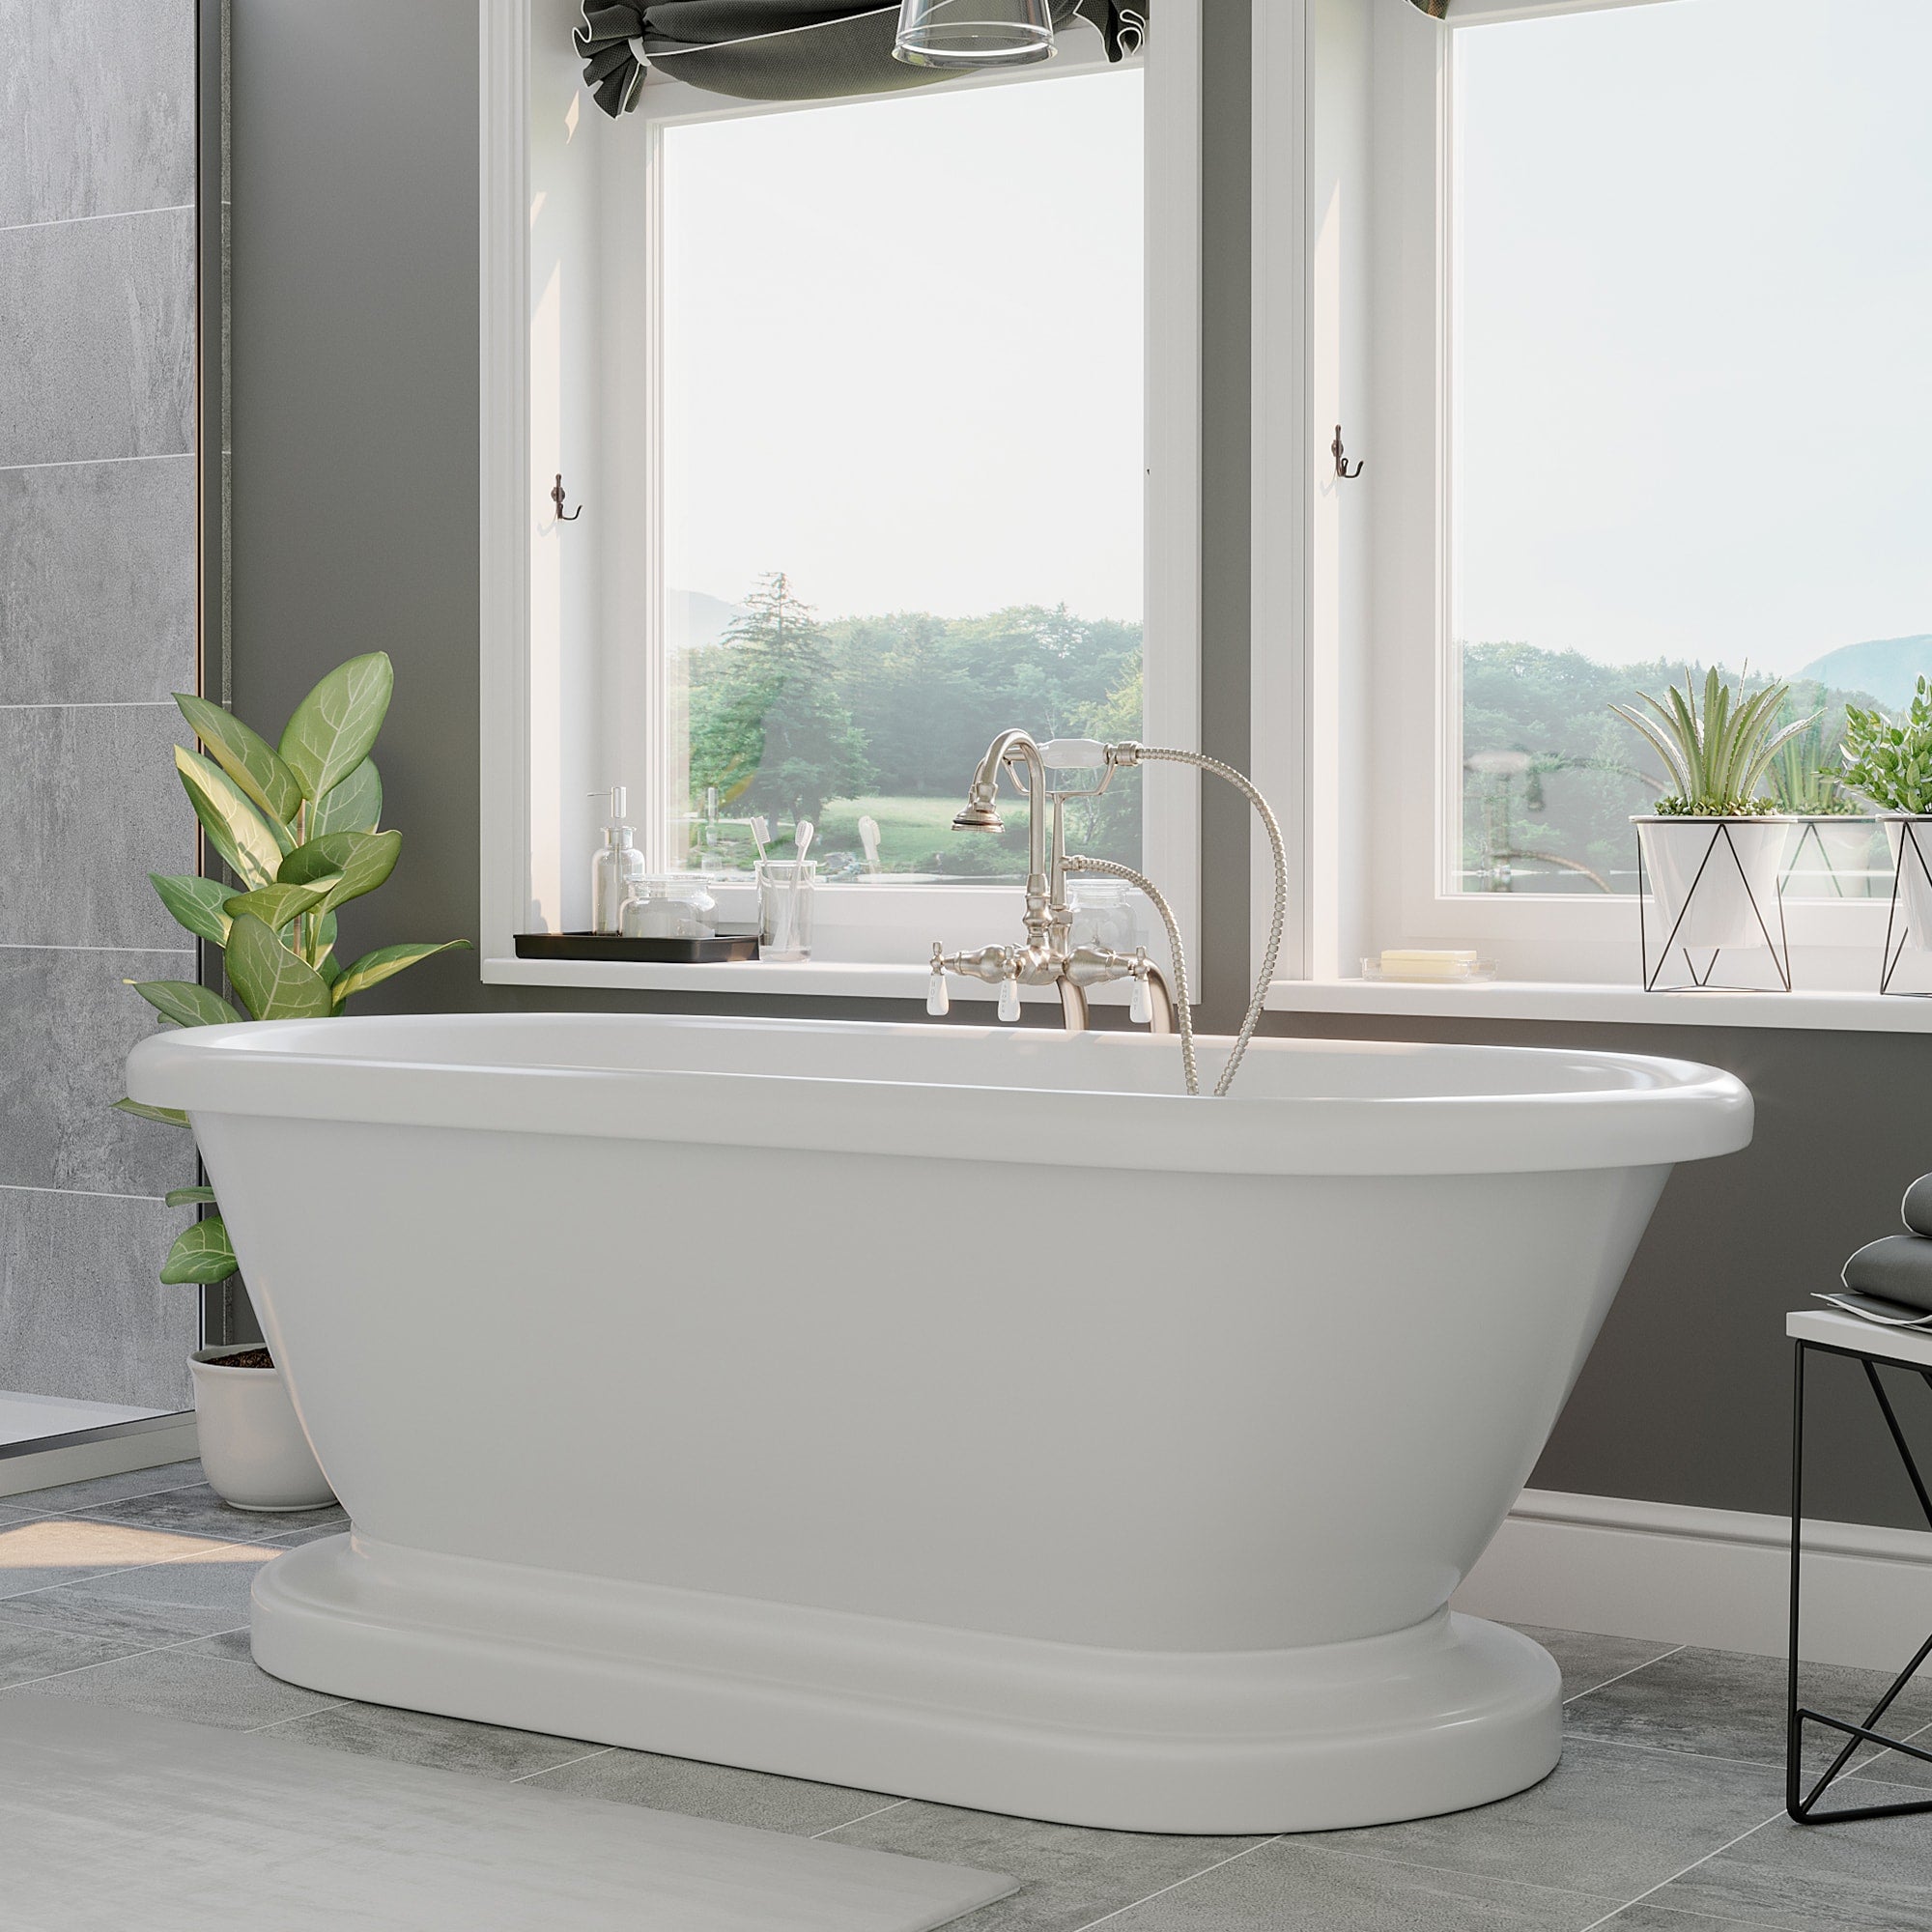 Cambridge Plumbing Double Ended Acrylic Pedestal Bathtub (White Gloss Finish) with Continuous Rim and Complete Plumbing Package - Brushed nickel tub filler with handheld shower - ADEP-398684-PKG-NH - Vital Hydrotherapy